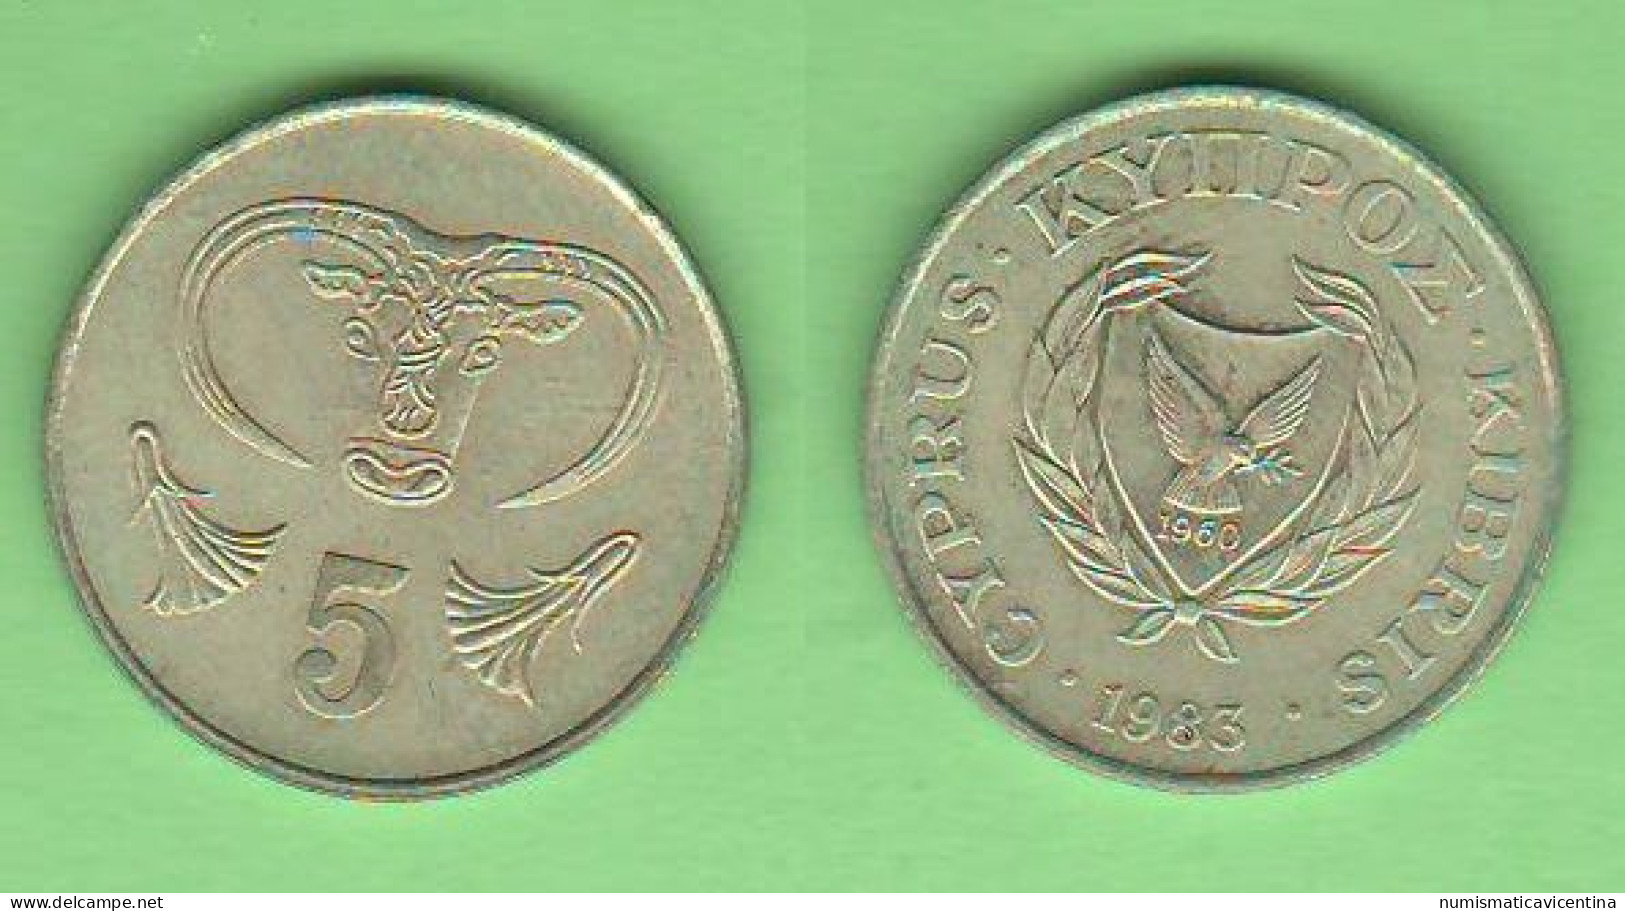 Cipro 5 Cents 1983 Cyprus Chipre Chypre - Chypre